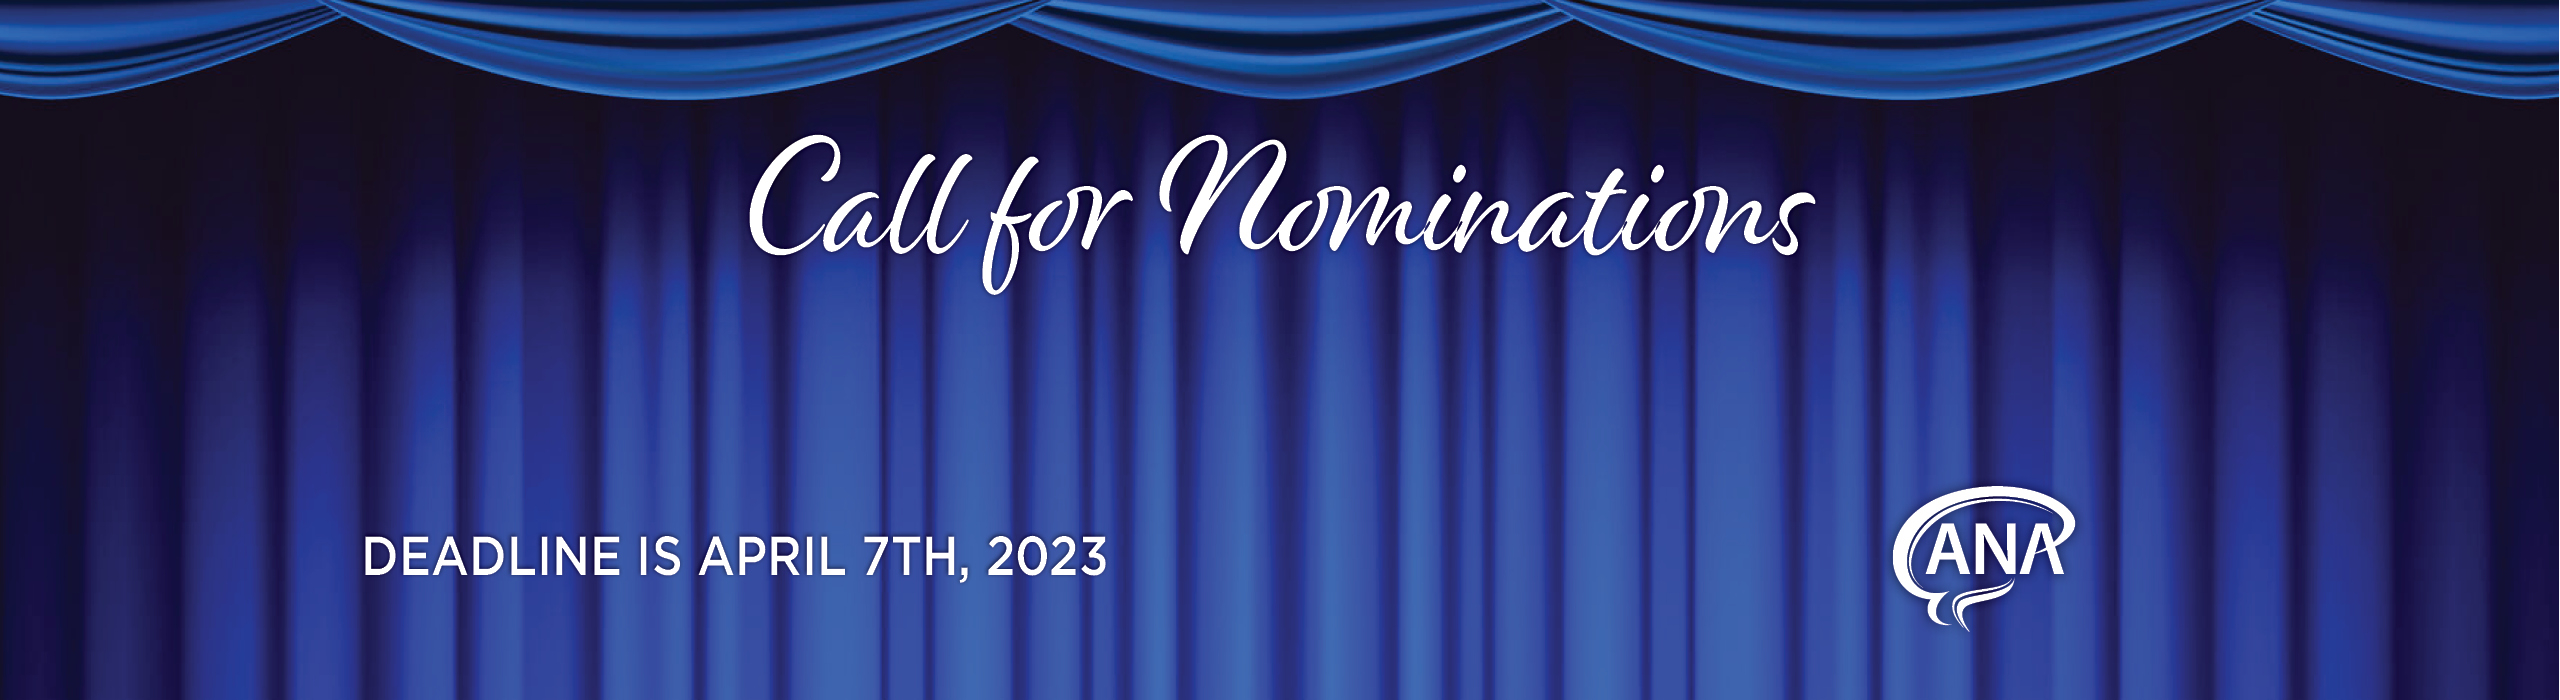 ANA Awards Call for Nominations 